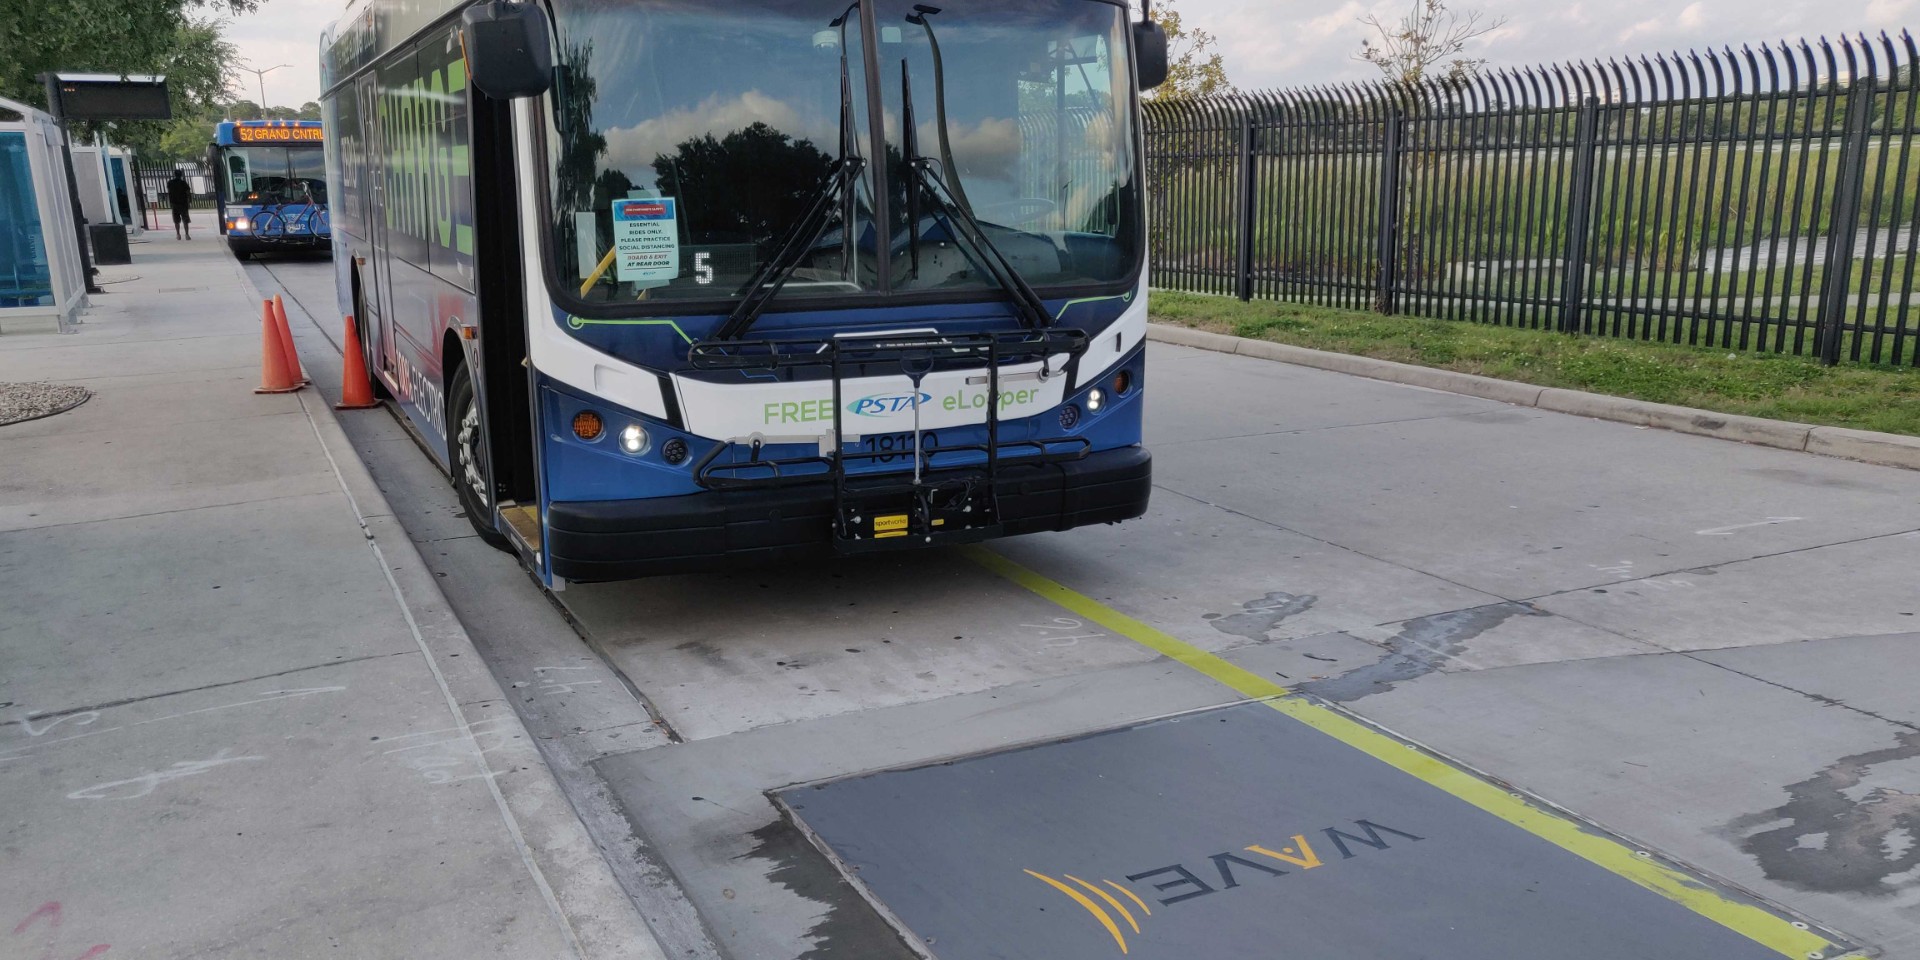 Deepwater spill pays for inductive wireless charging bus station - Electrek